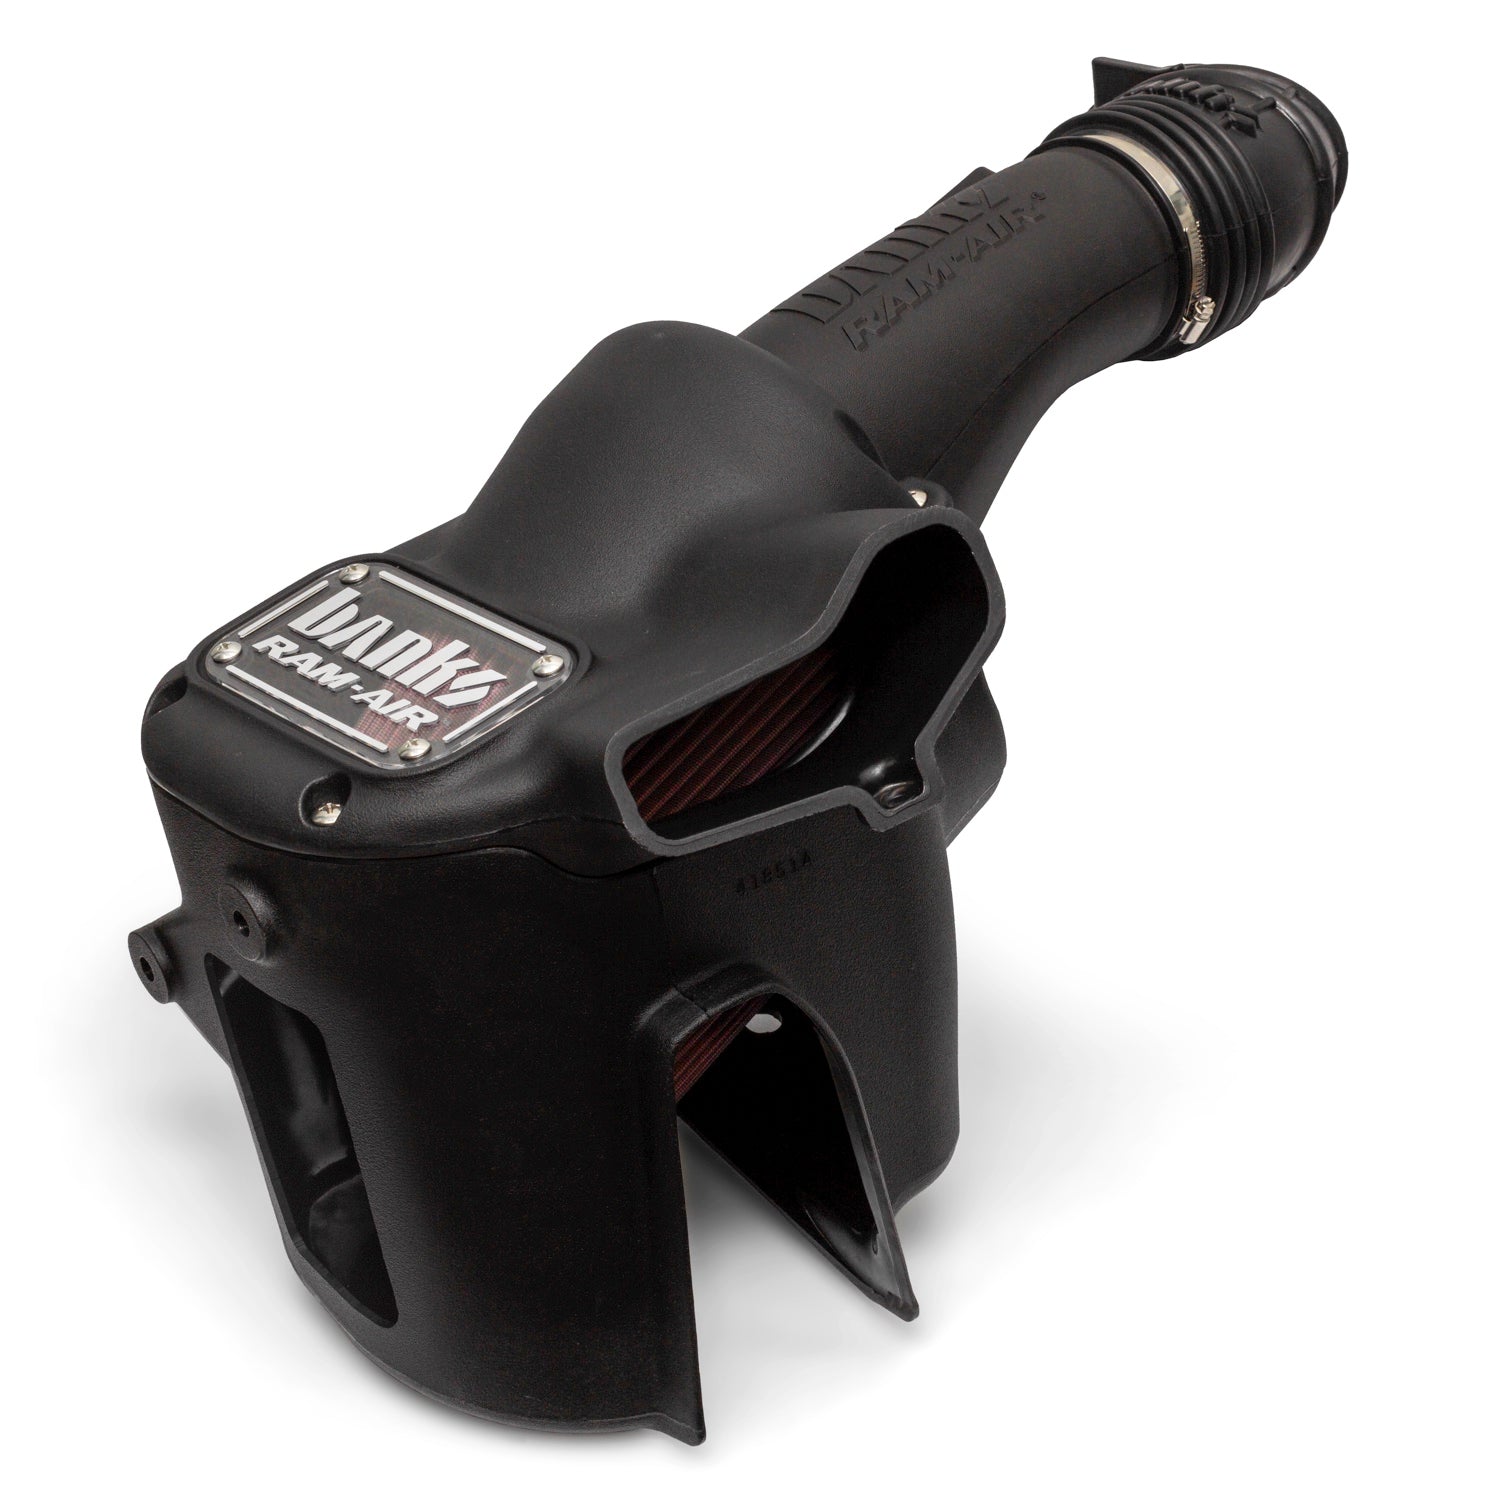 Banks Ram-Air intake for the Ford PowerPack